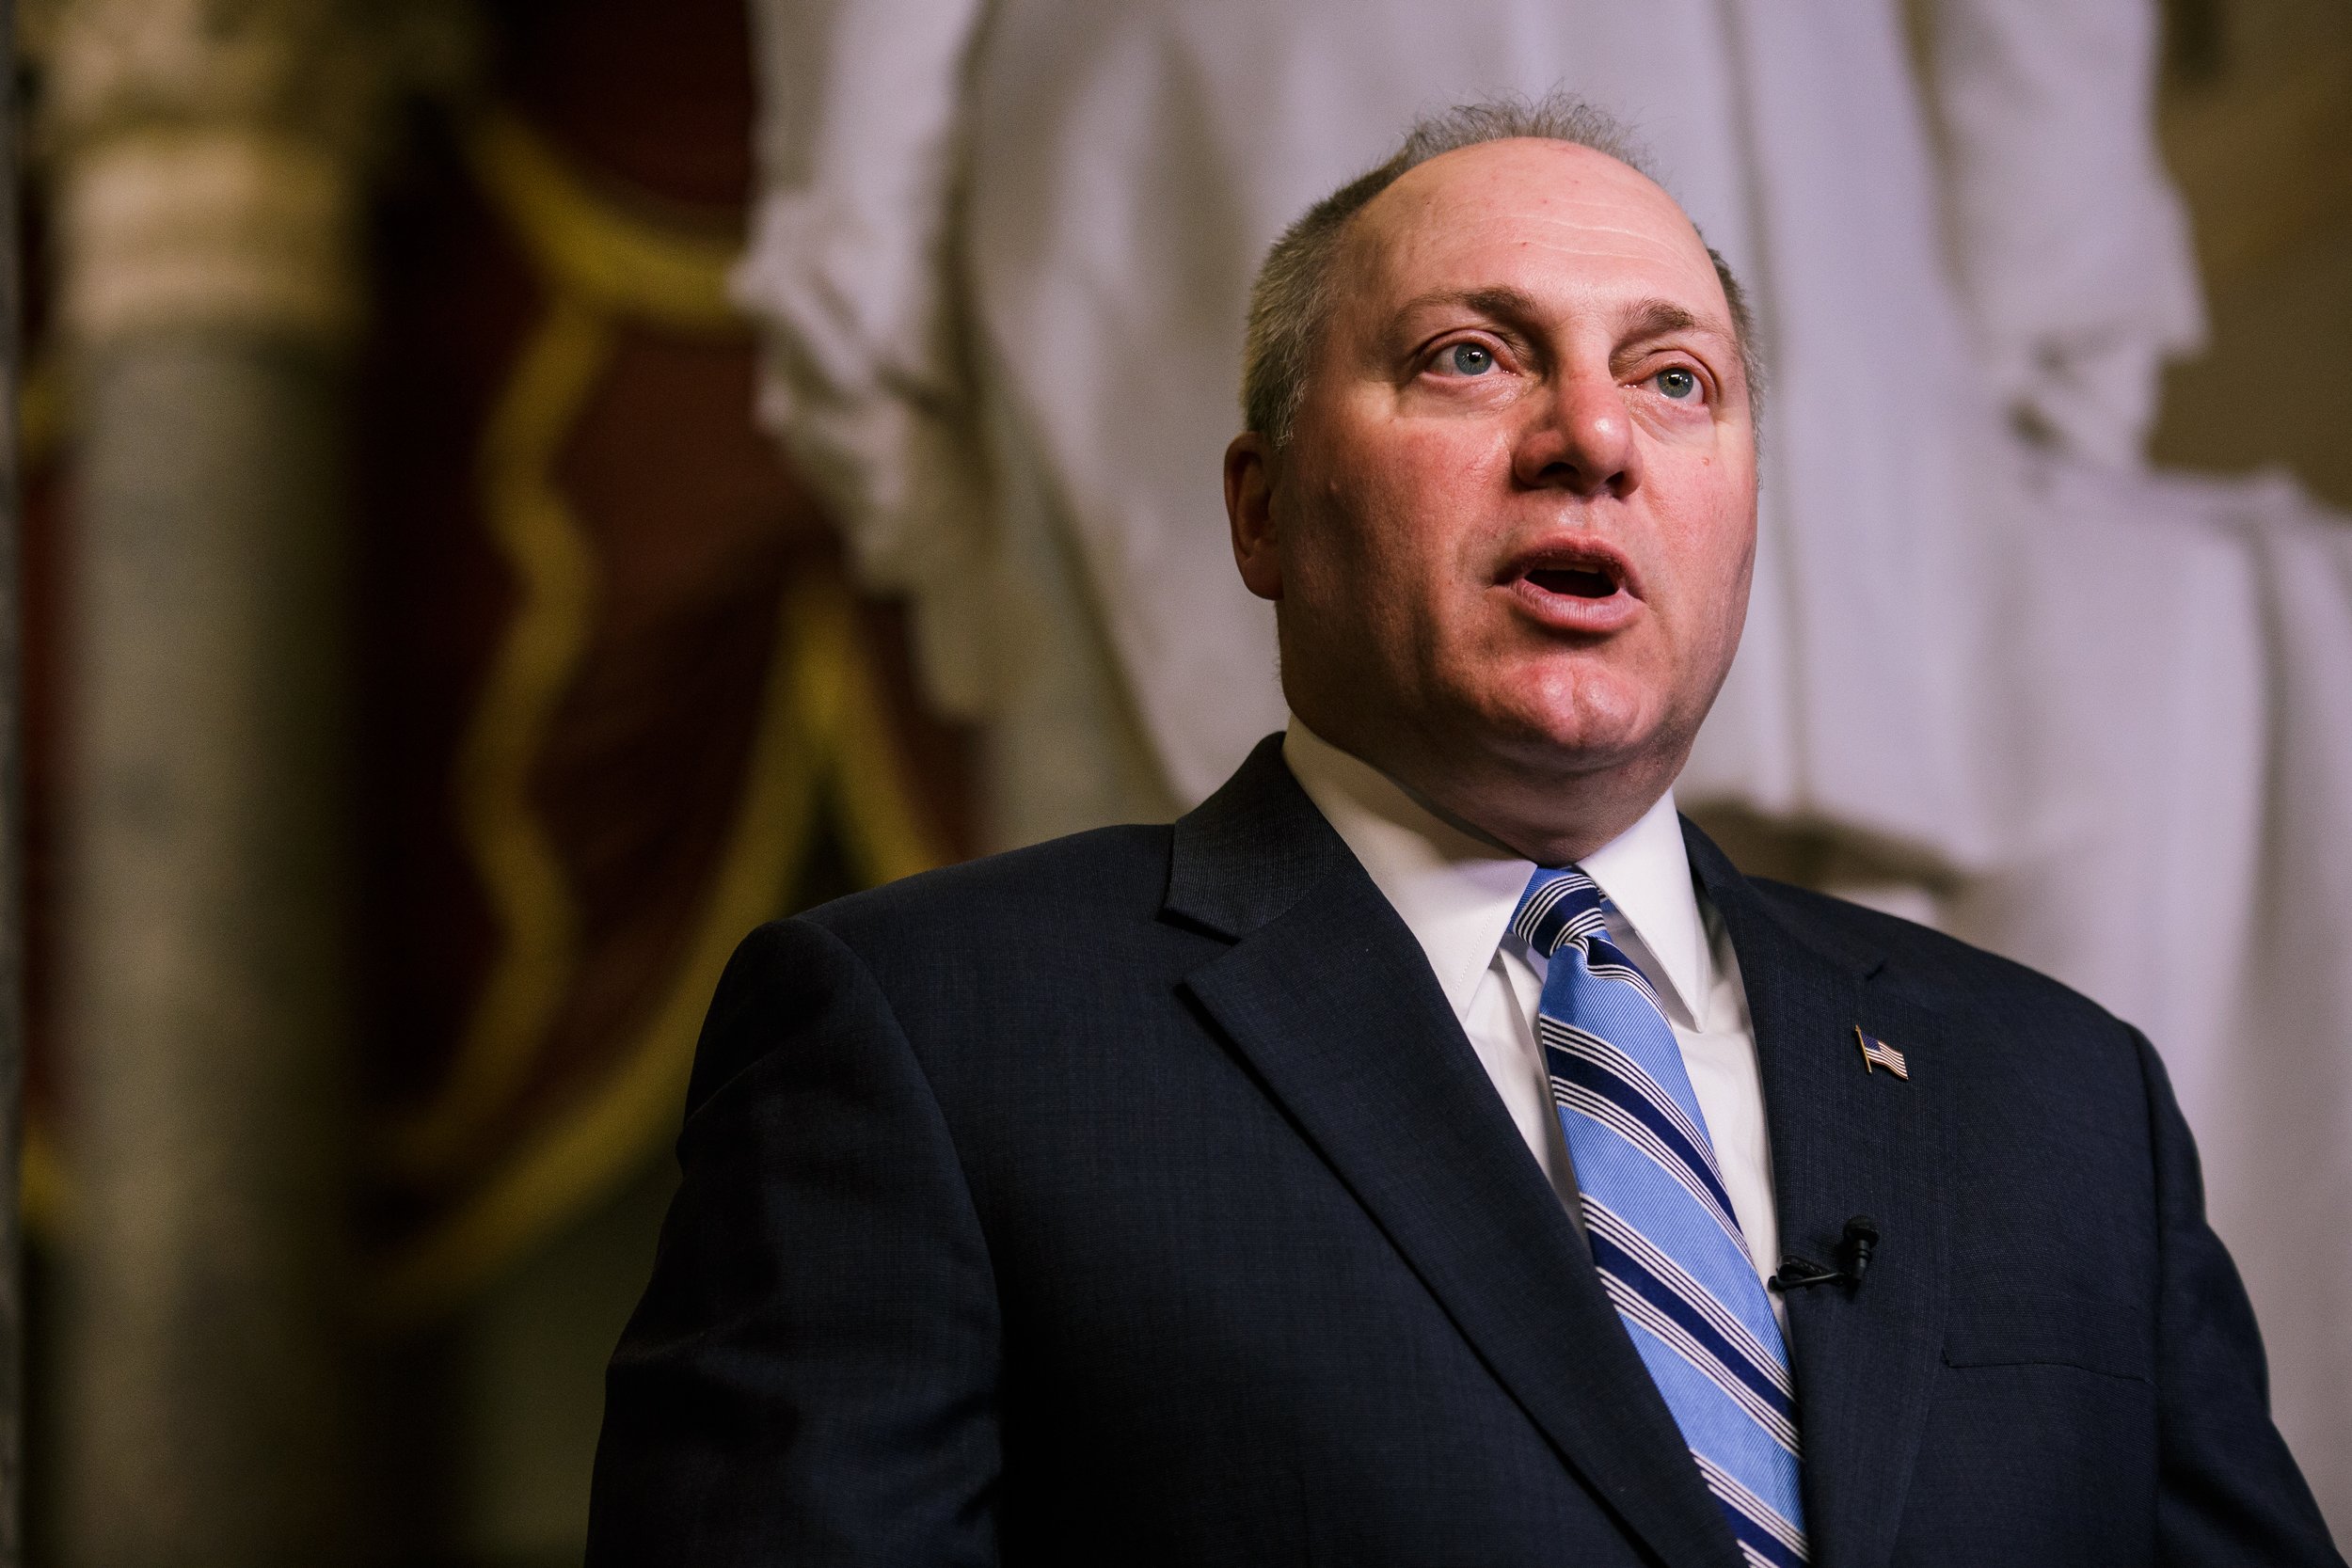  Rep. Steve Scalise participates in an interview in the Capitol Statuary.    January 2019   